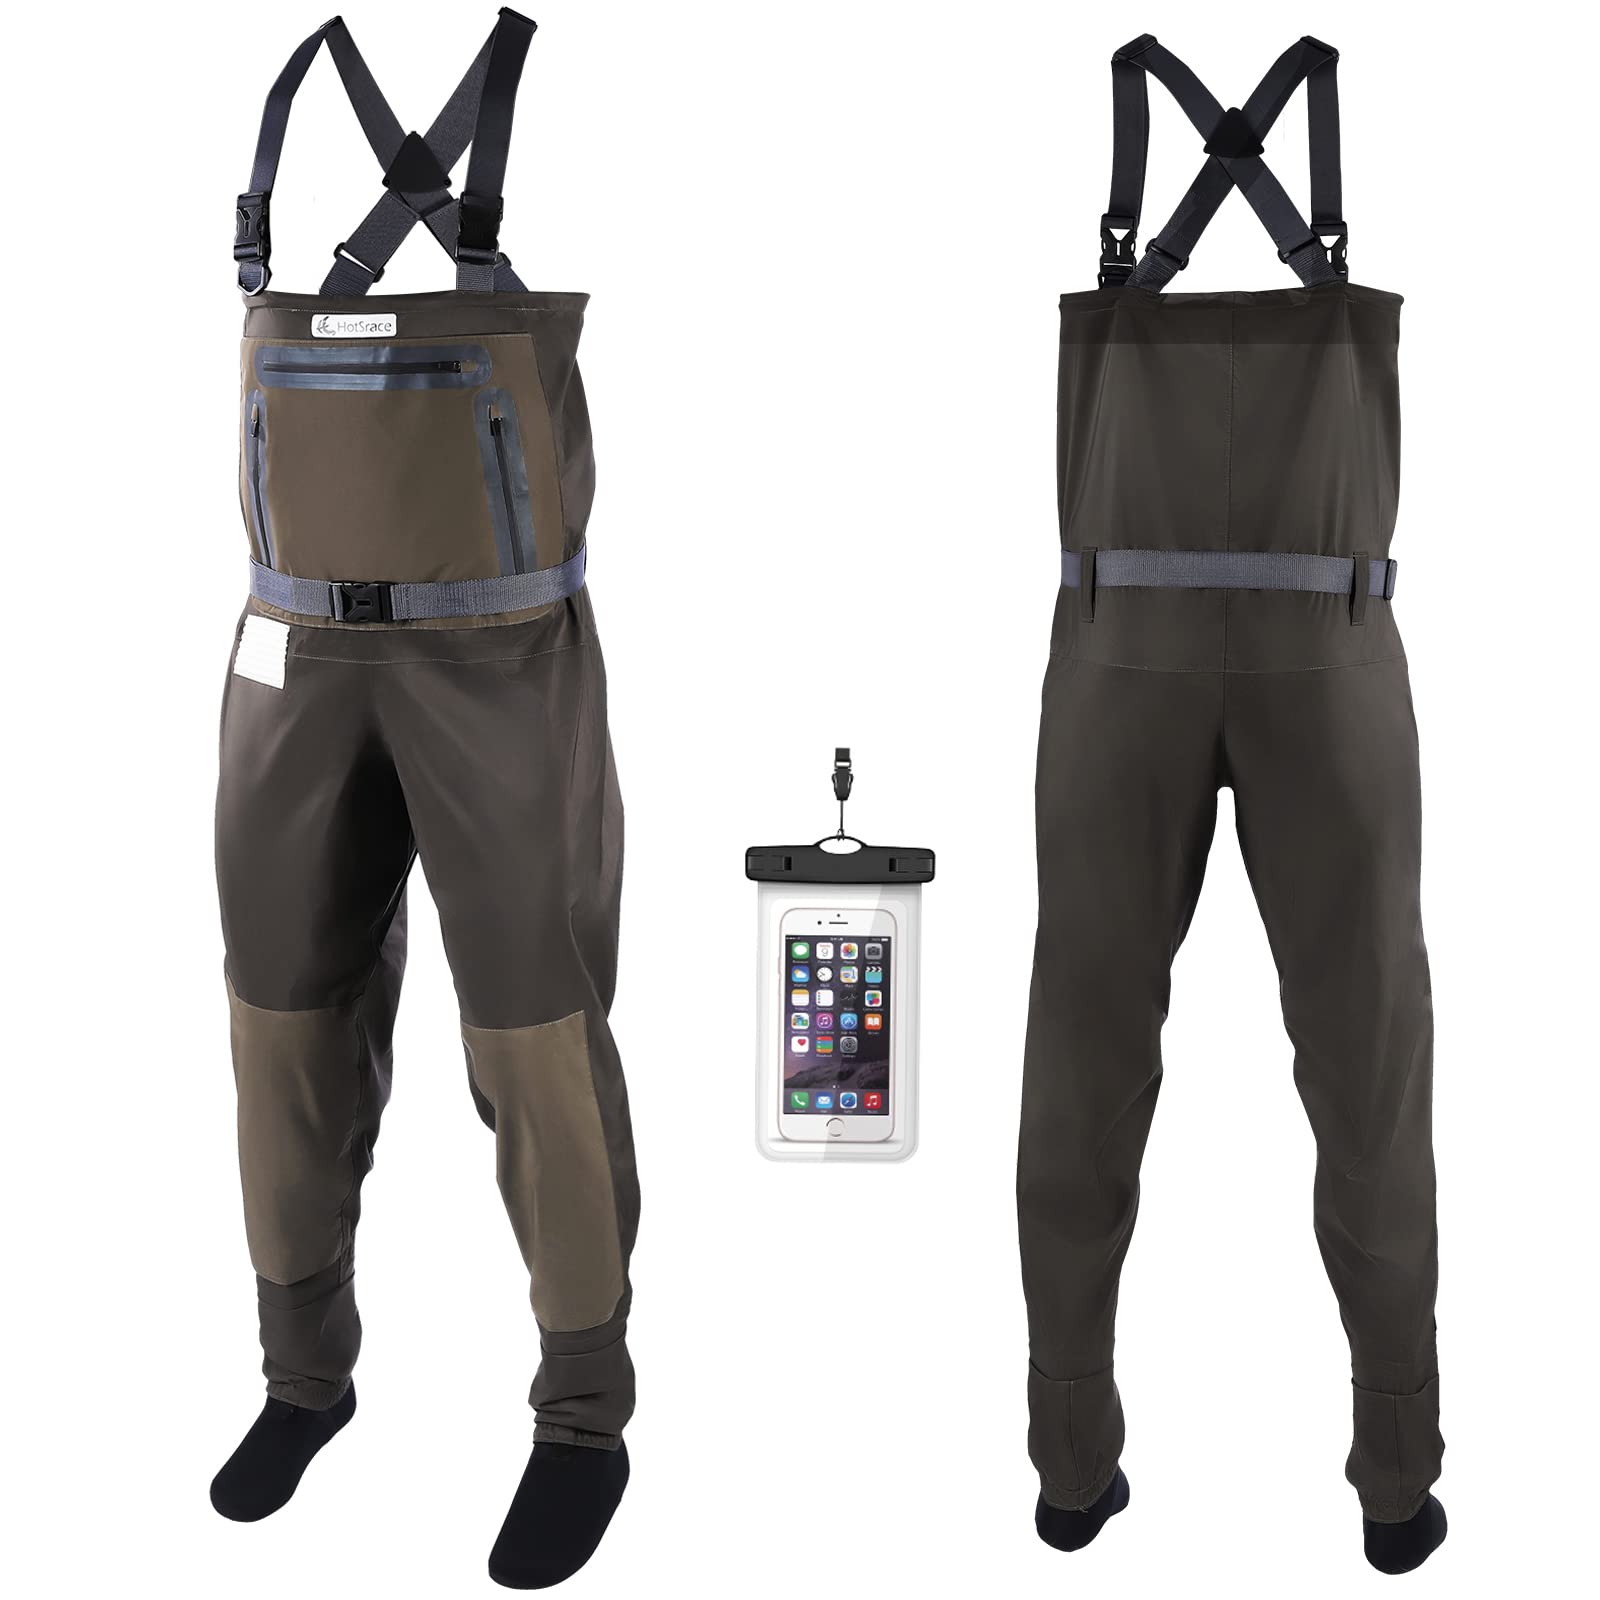 SearQing Waders Waterproof Lightweight Fishing Waders with Boots